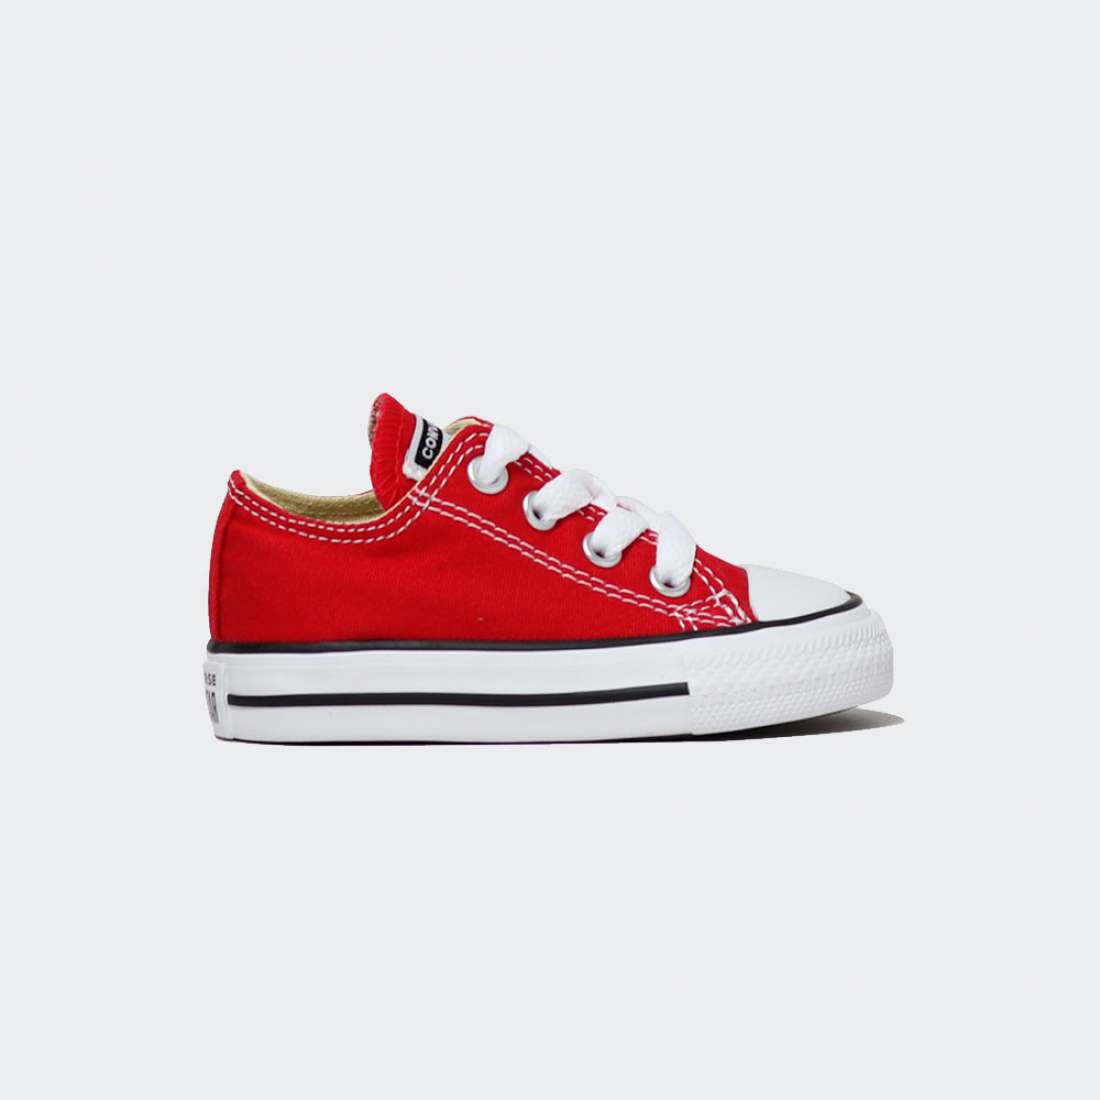 CONVERSE CHUCK TAYLOR ALL STAR I RED